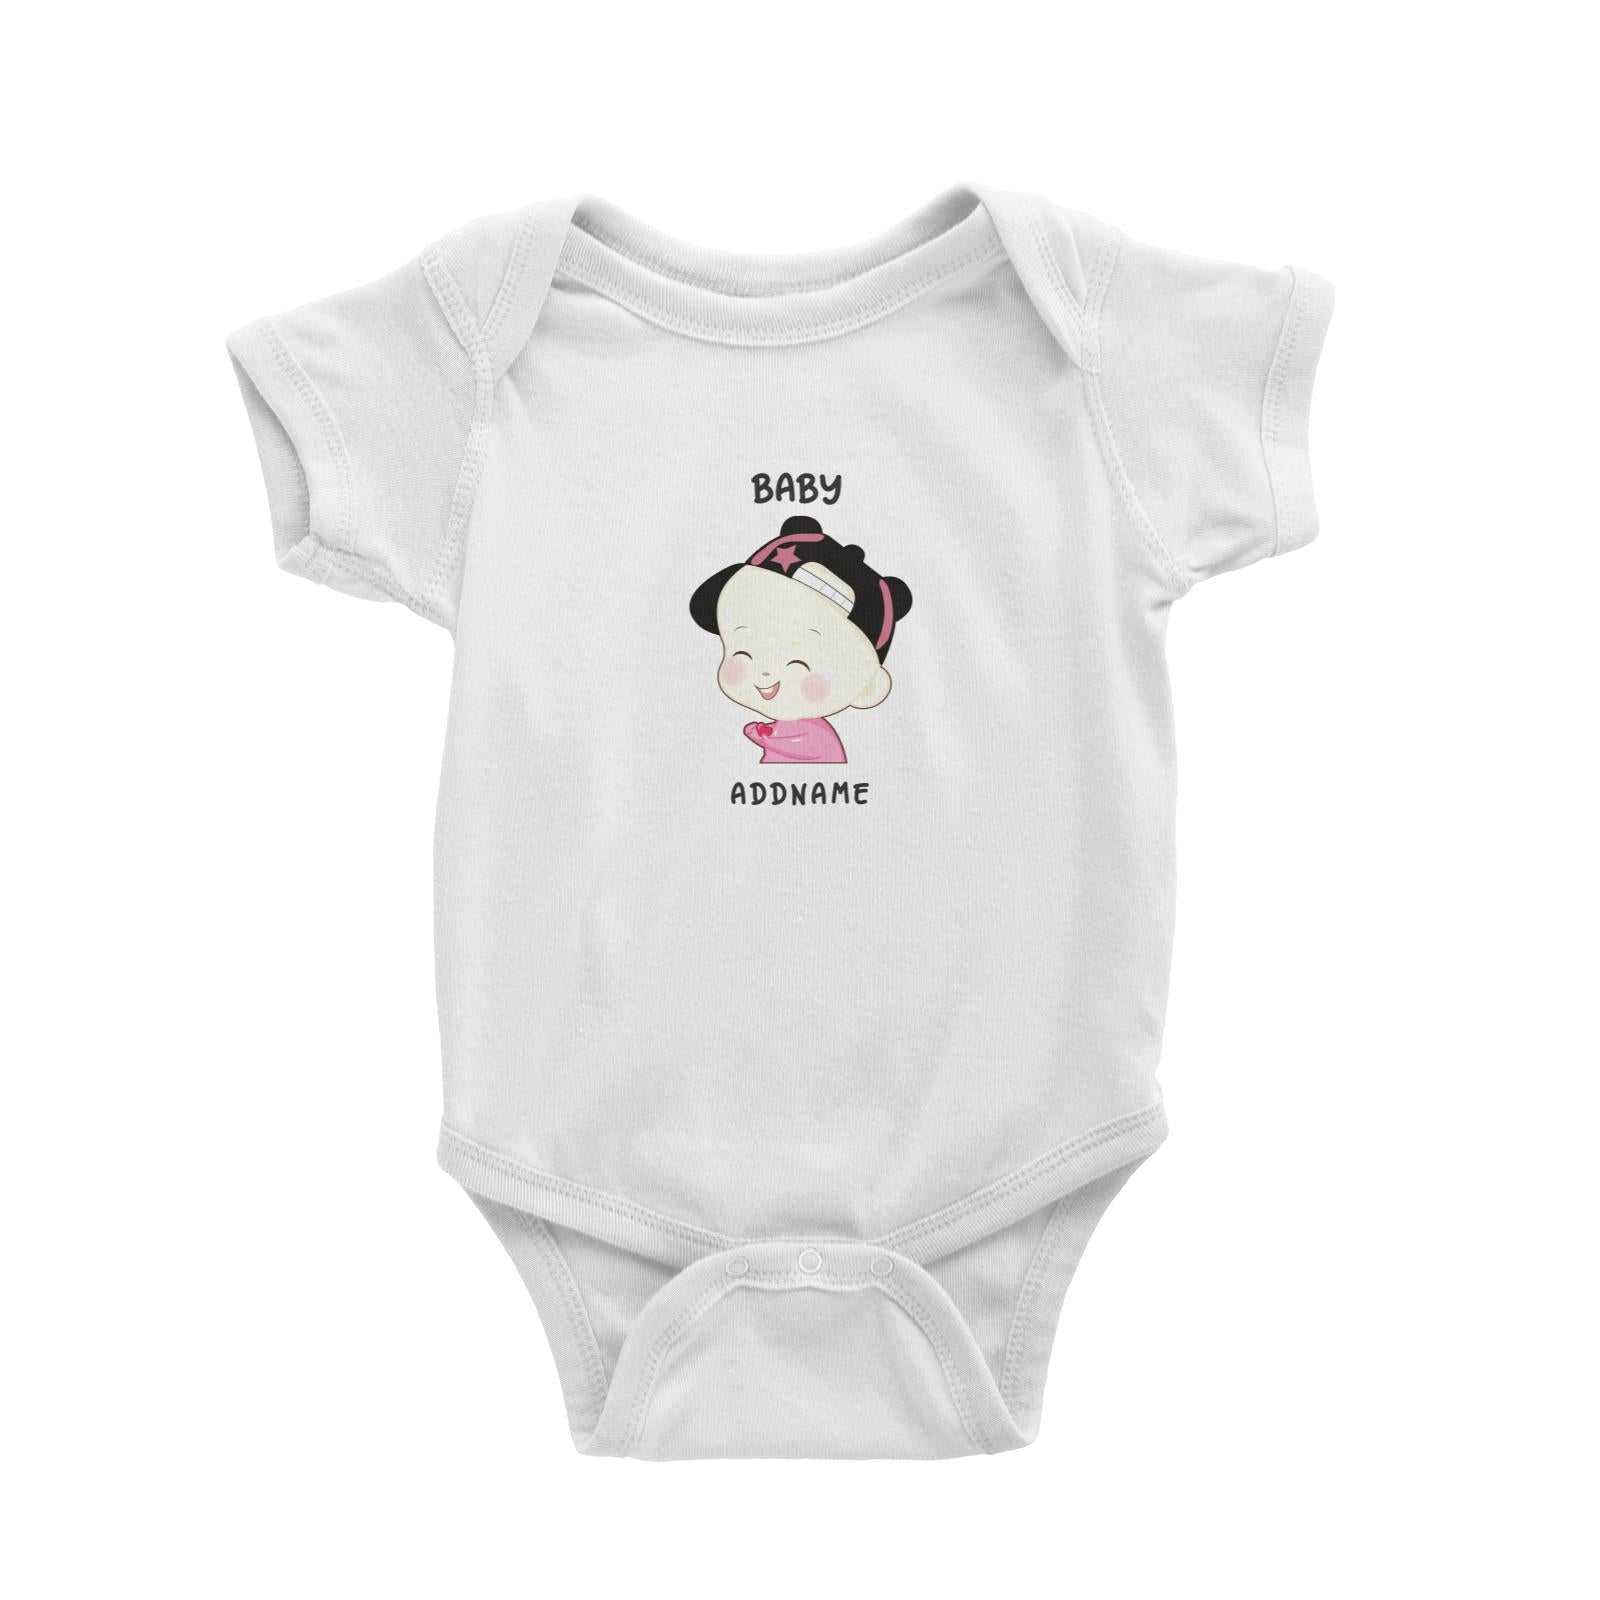 My Lovely Family Series Baby Girl Addname Baby Romper (FLASH DEAL)